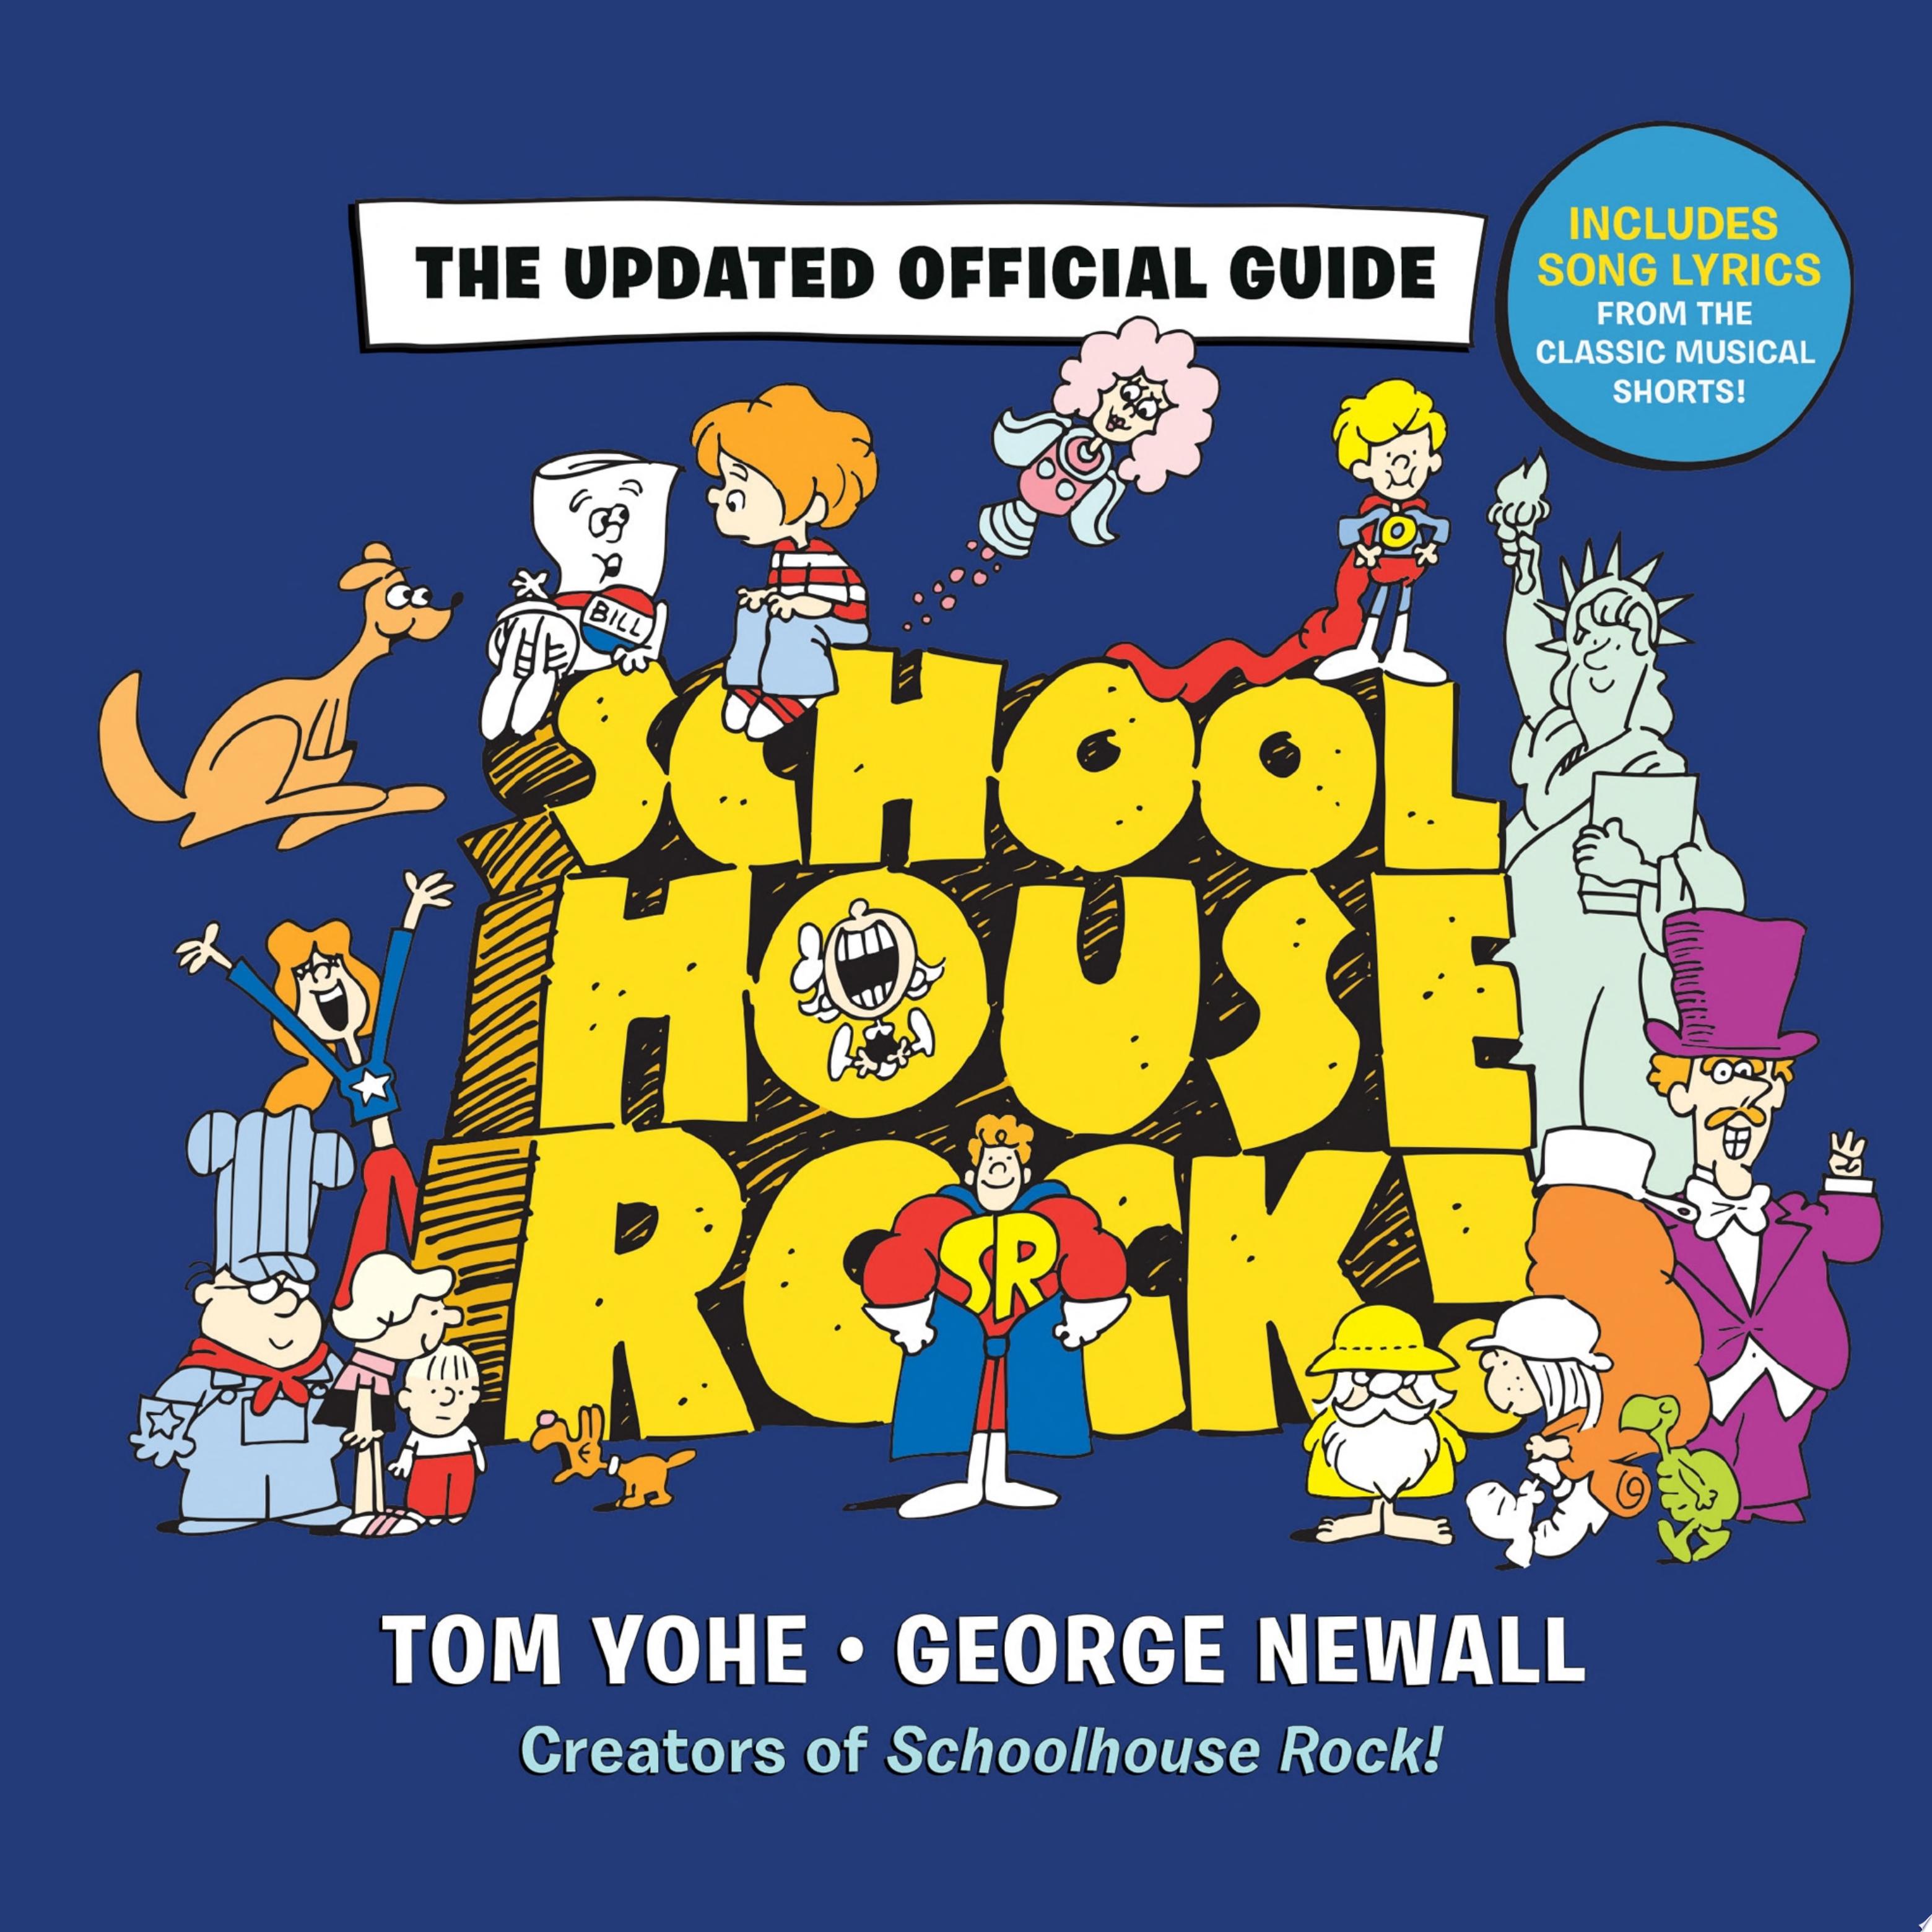 Image for "Schoolhouse Rock!: The Updated Official Guide"